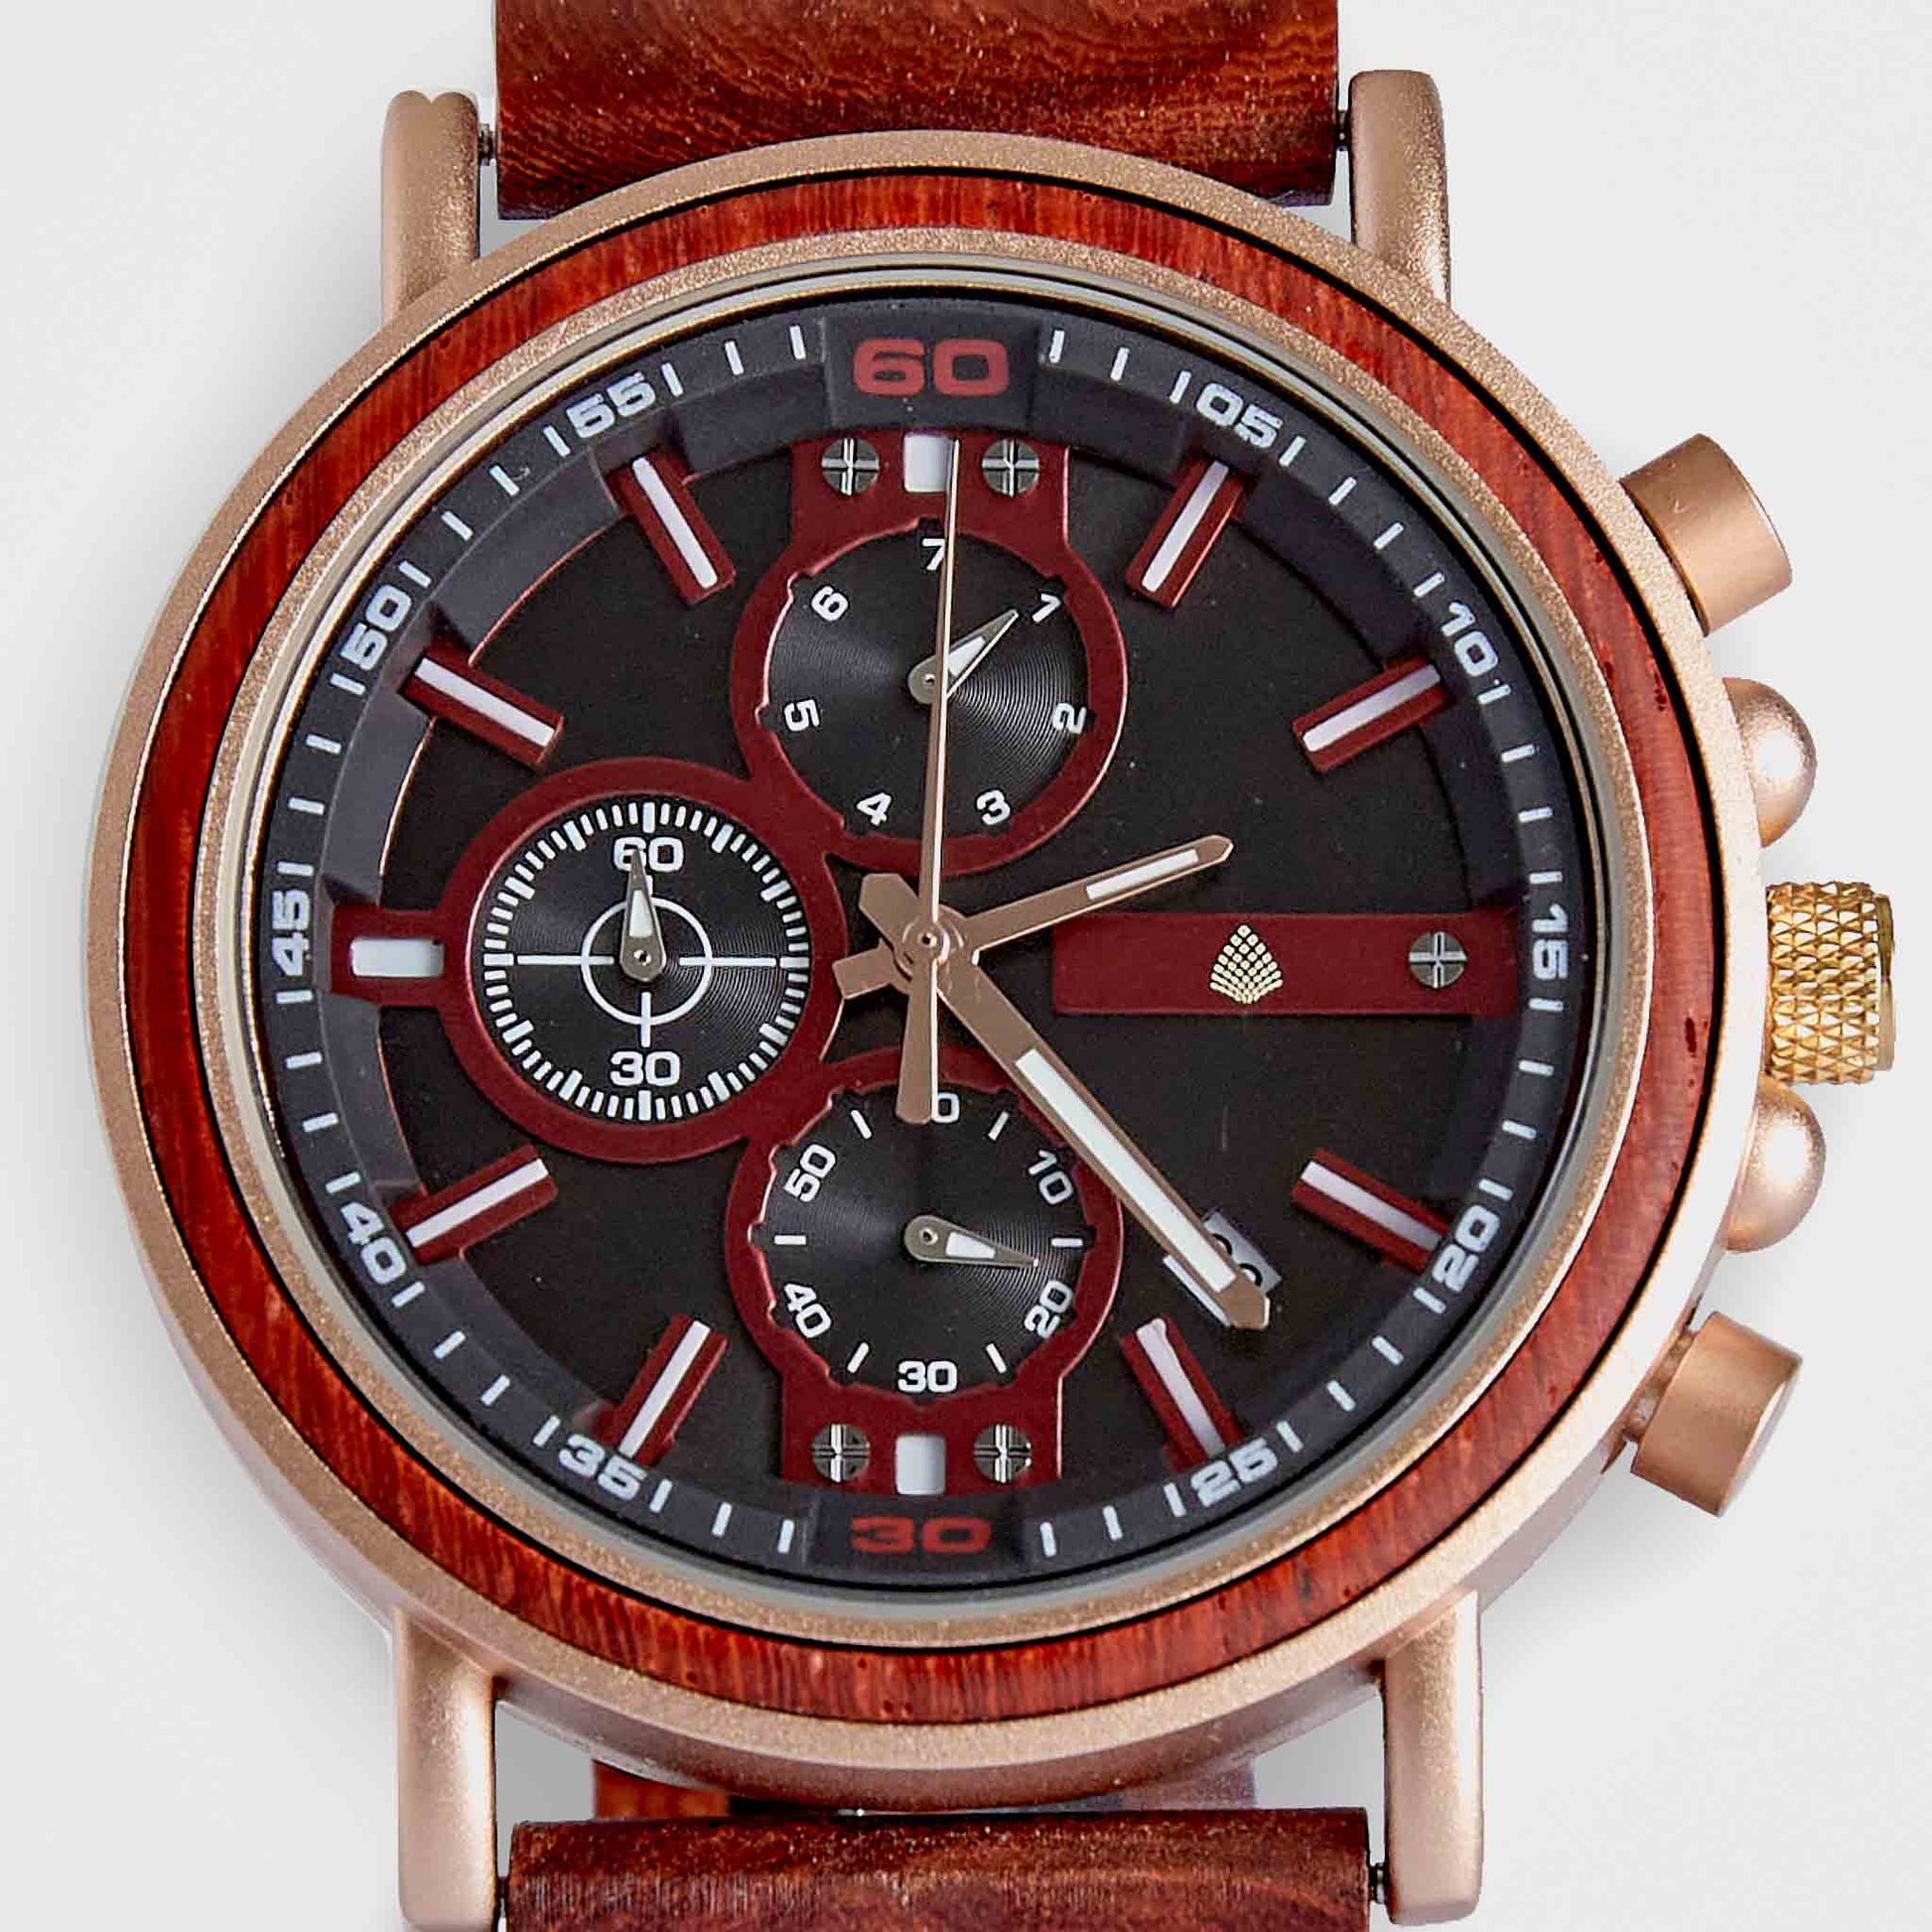 Chronograph Wooden Watch For Men: The Redwood